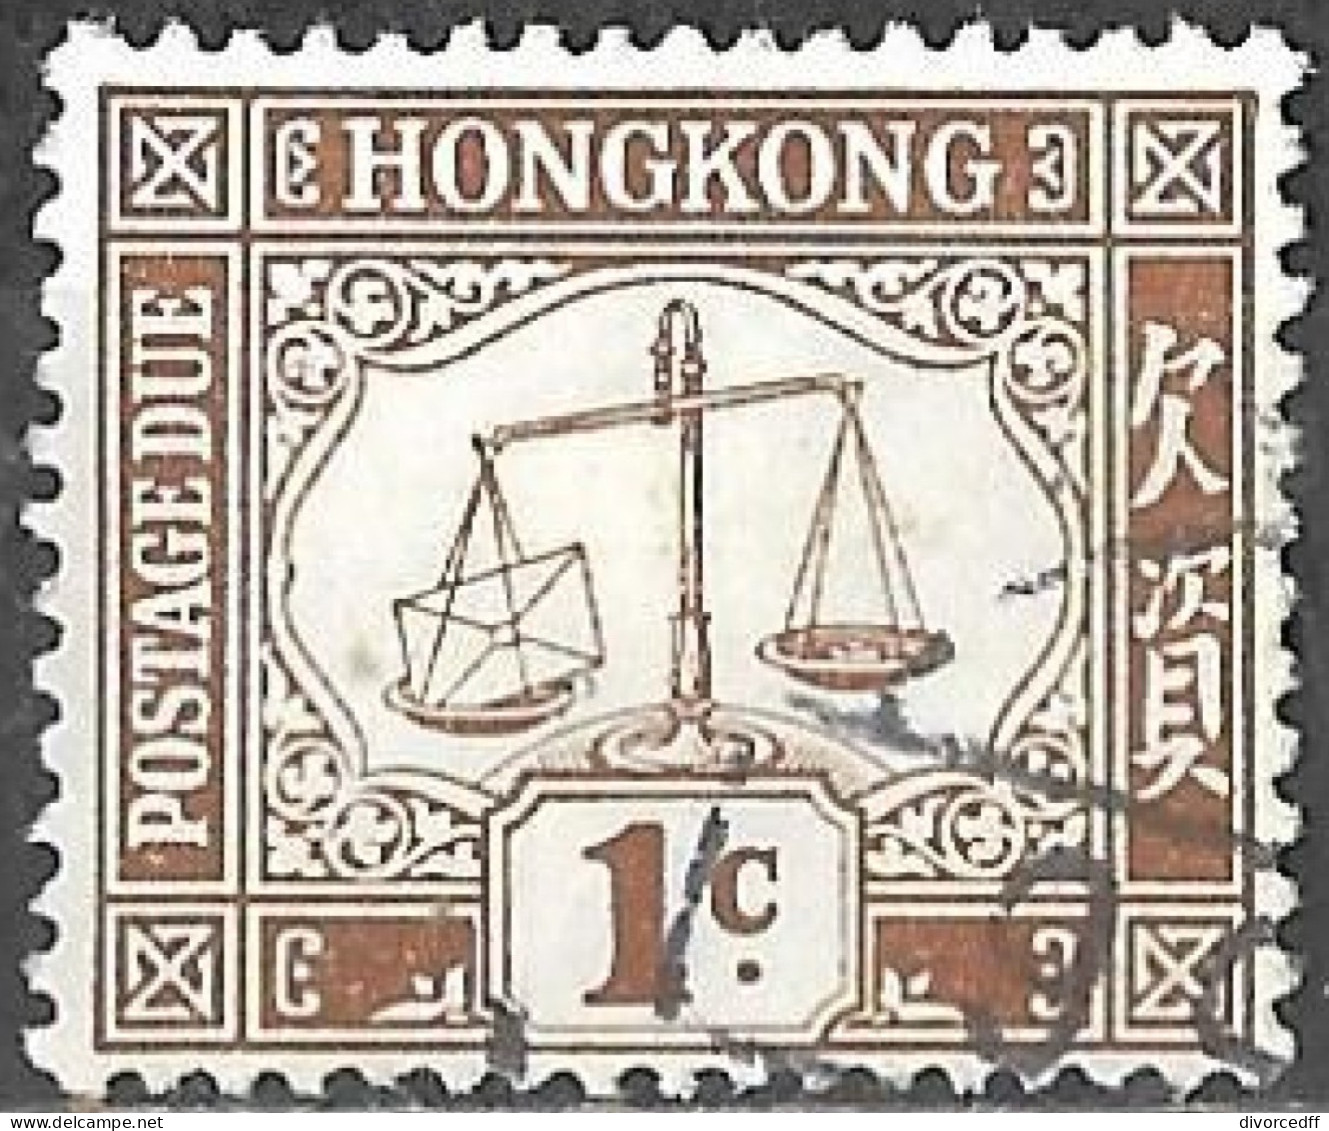 Hong Kong Used Postage Due Stamp Scales Showing Letter Overweight 1 Cent [WLT283] - Timbres-taxe